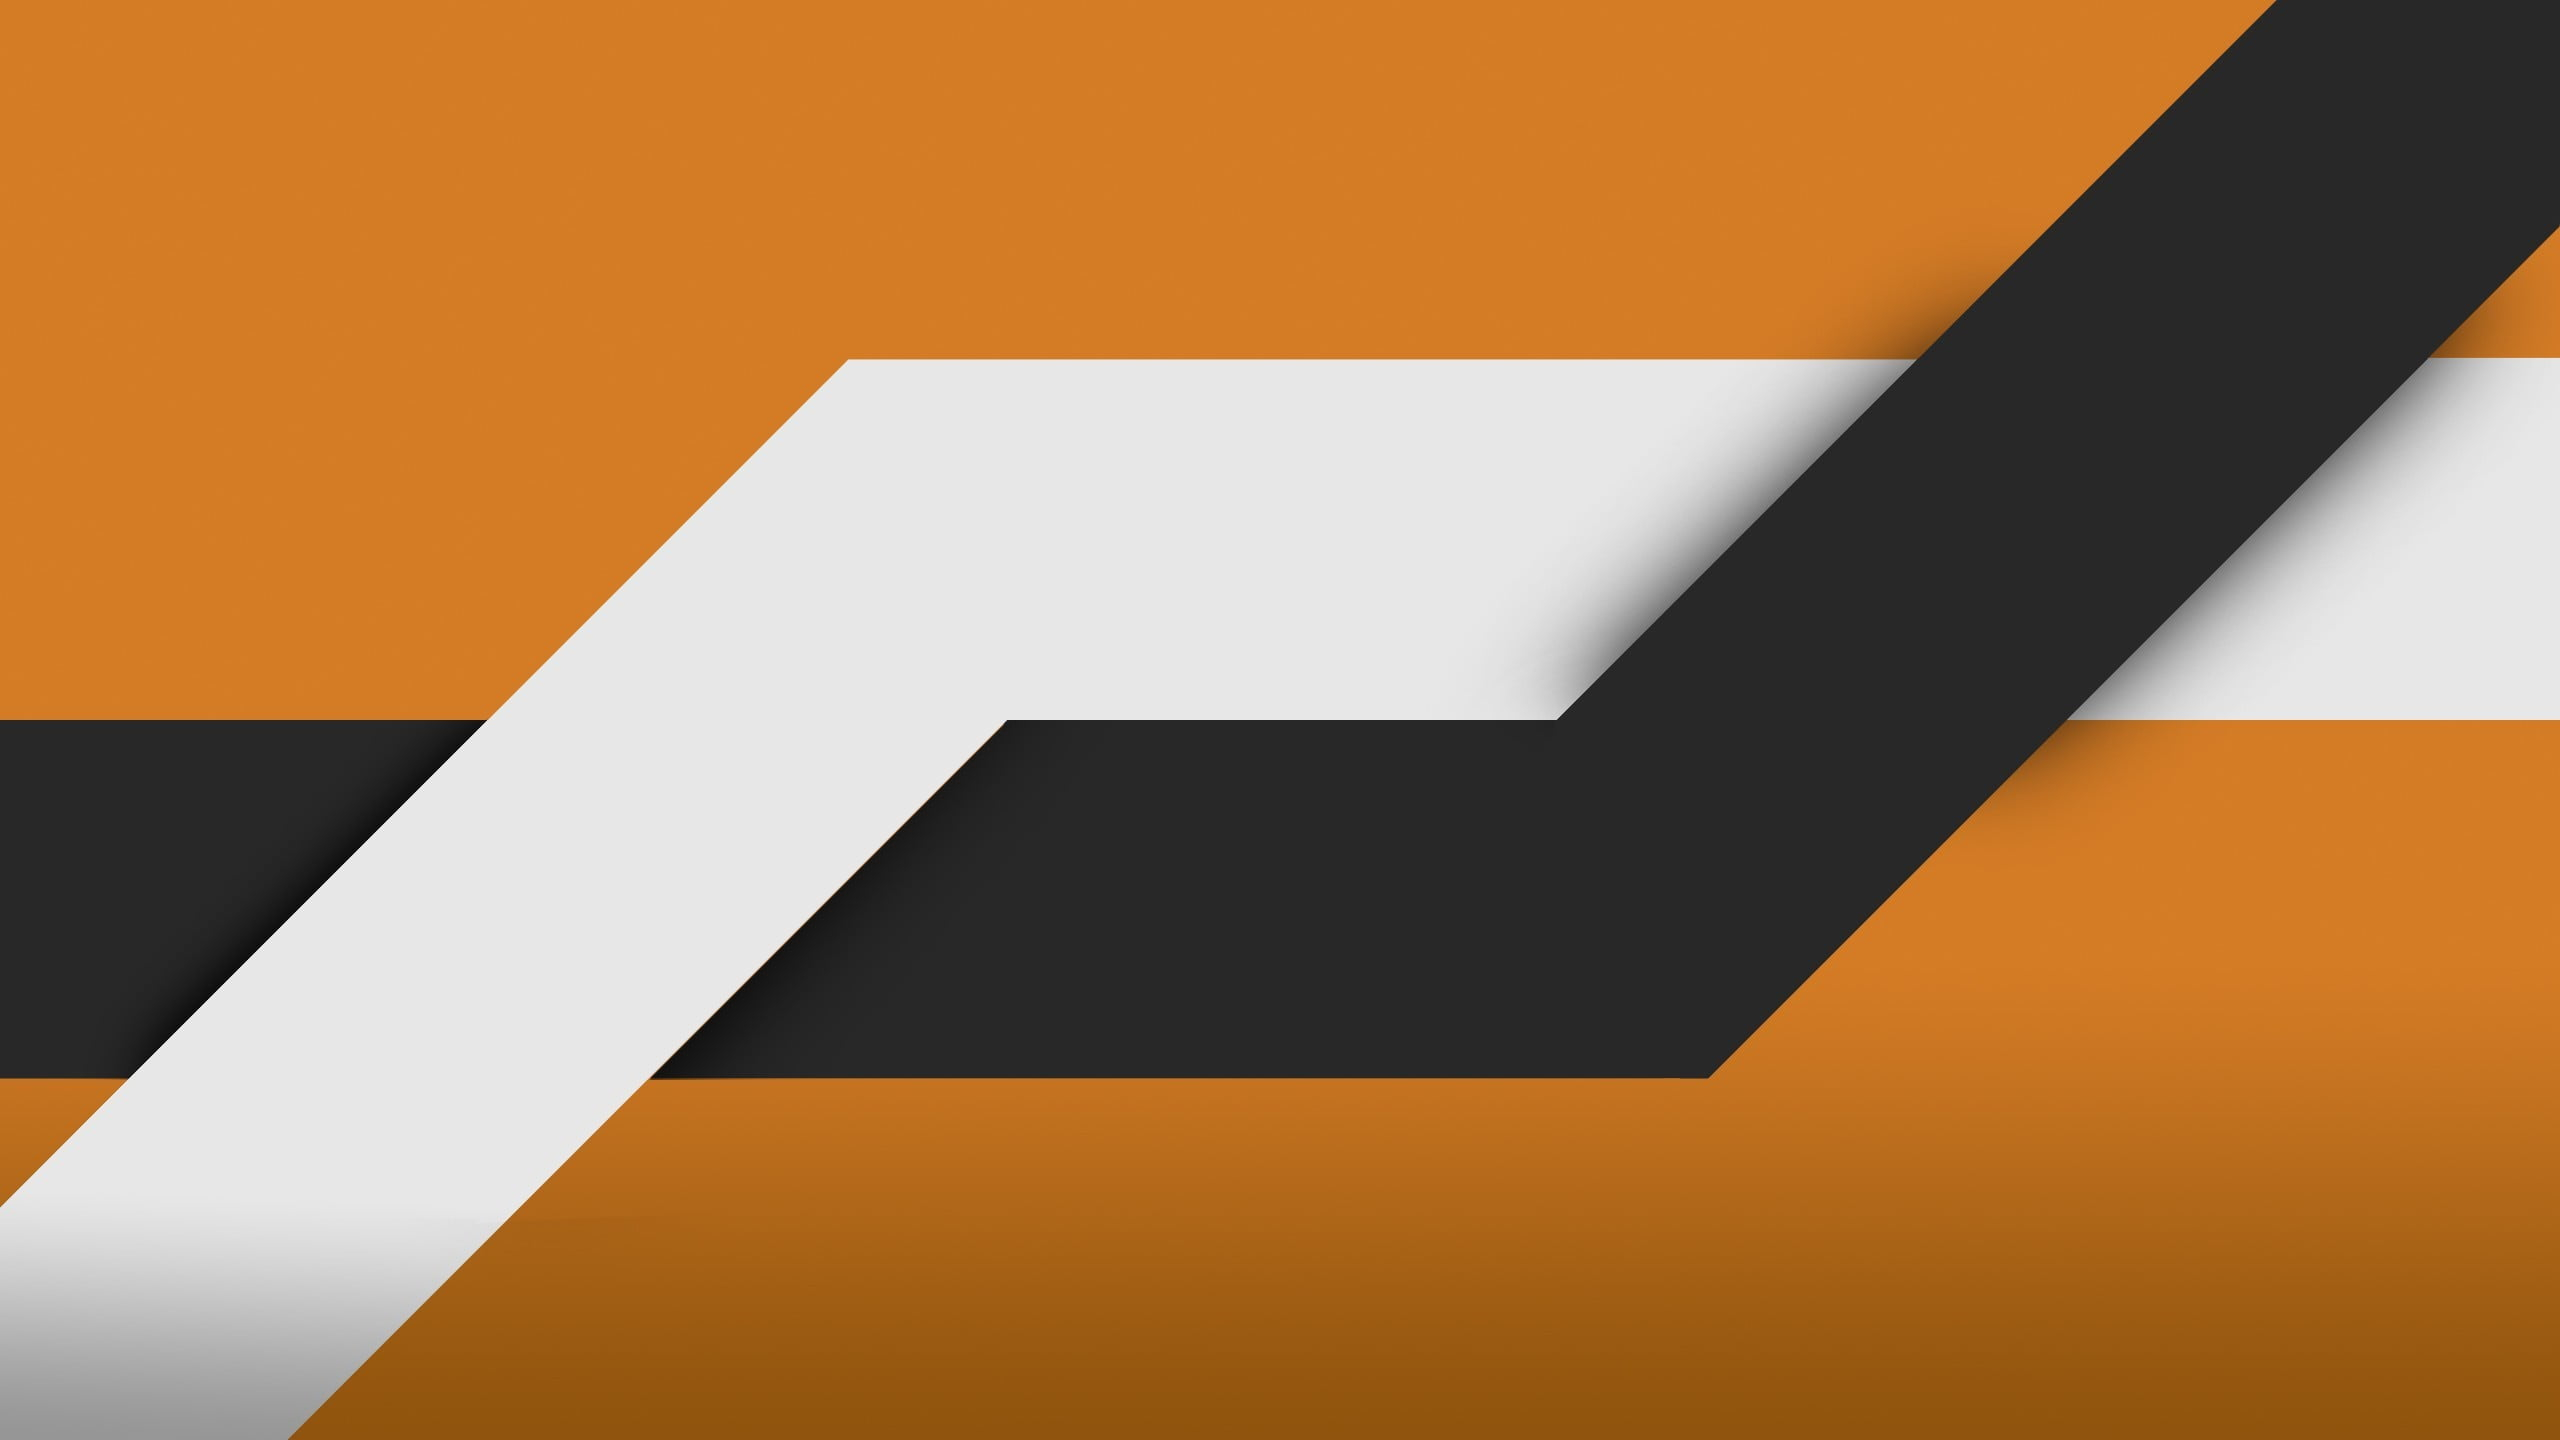 2560x1440 Orange and Black and White Wallpapers Top Free Orange and Black and White Backgrounds